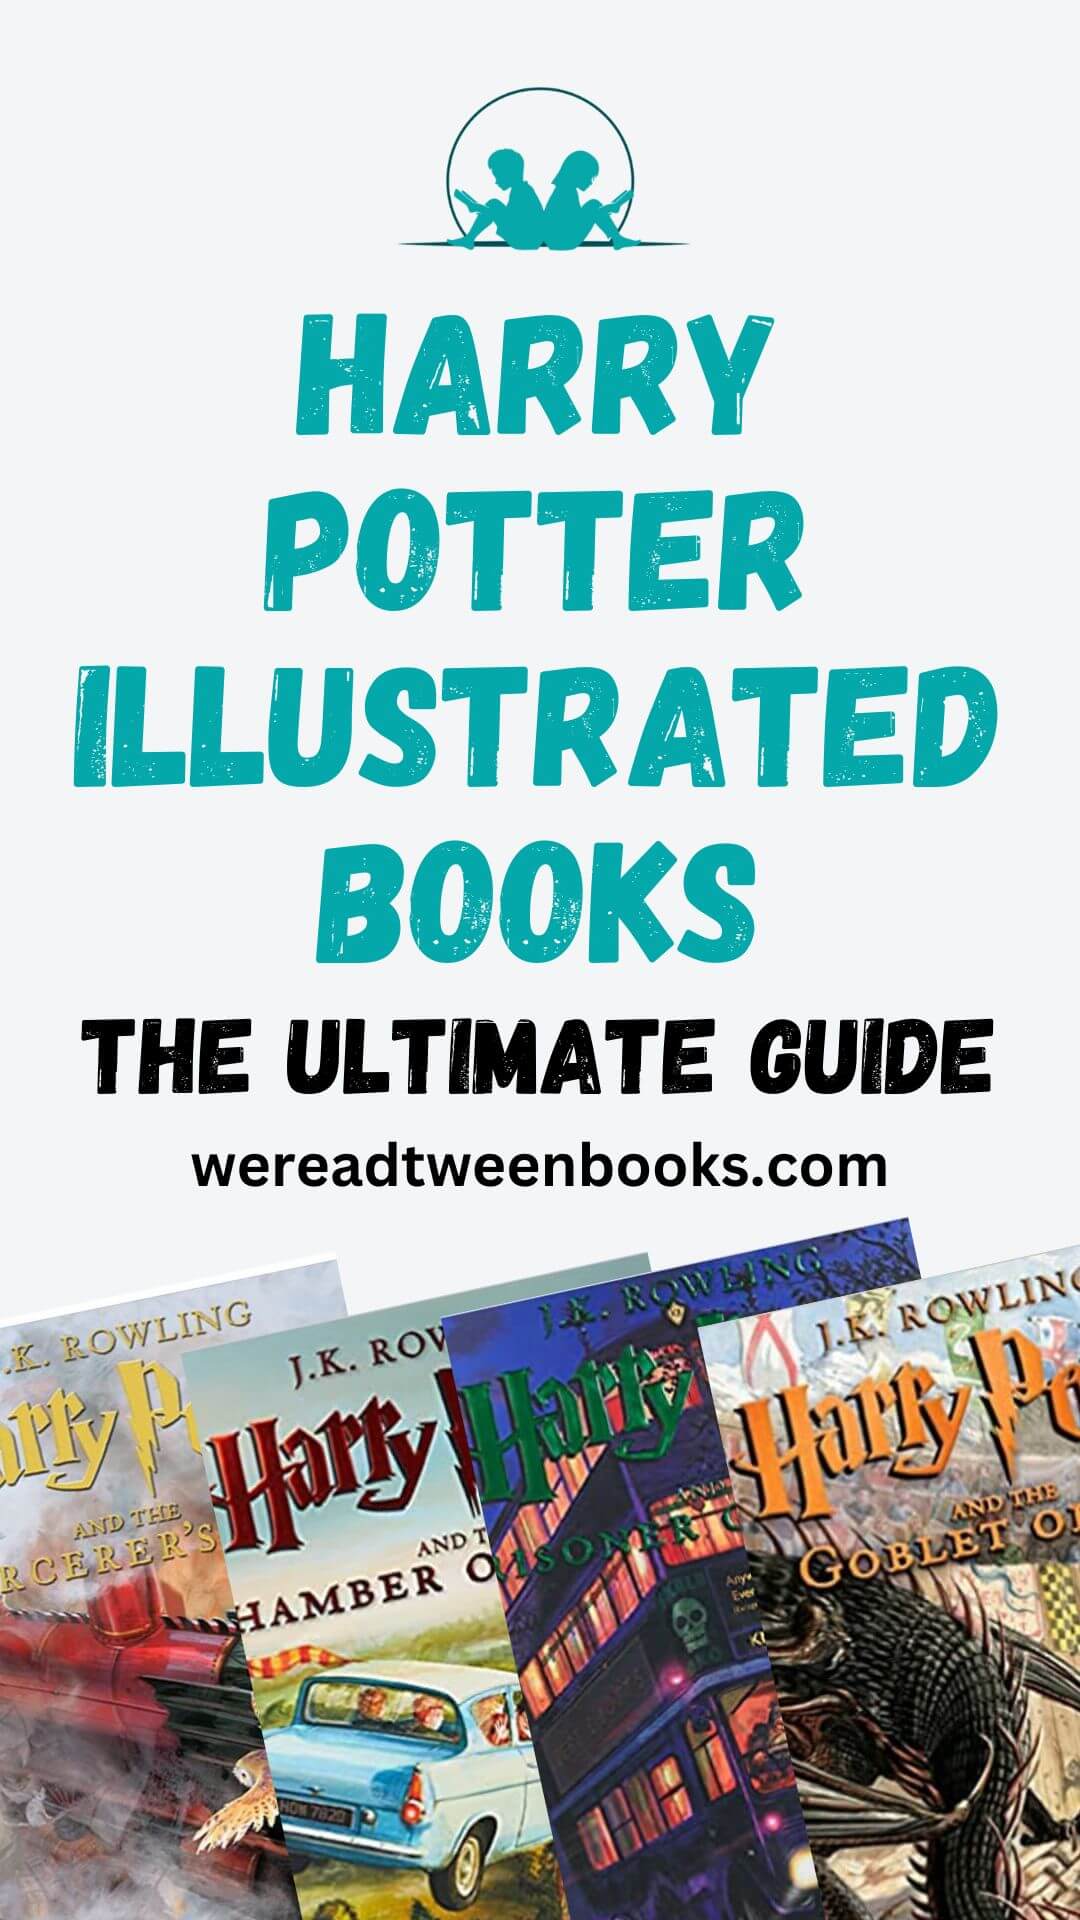 Check out the ultimate guide of all the Harry Potter illustrated books in order from bloggers, We Read Tween Books.